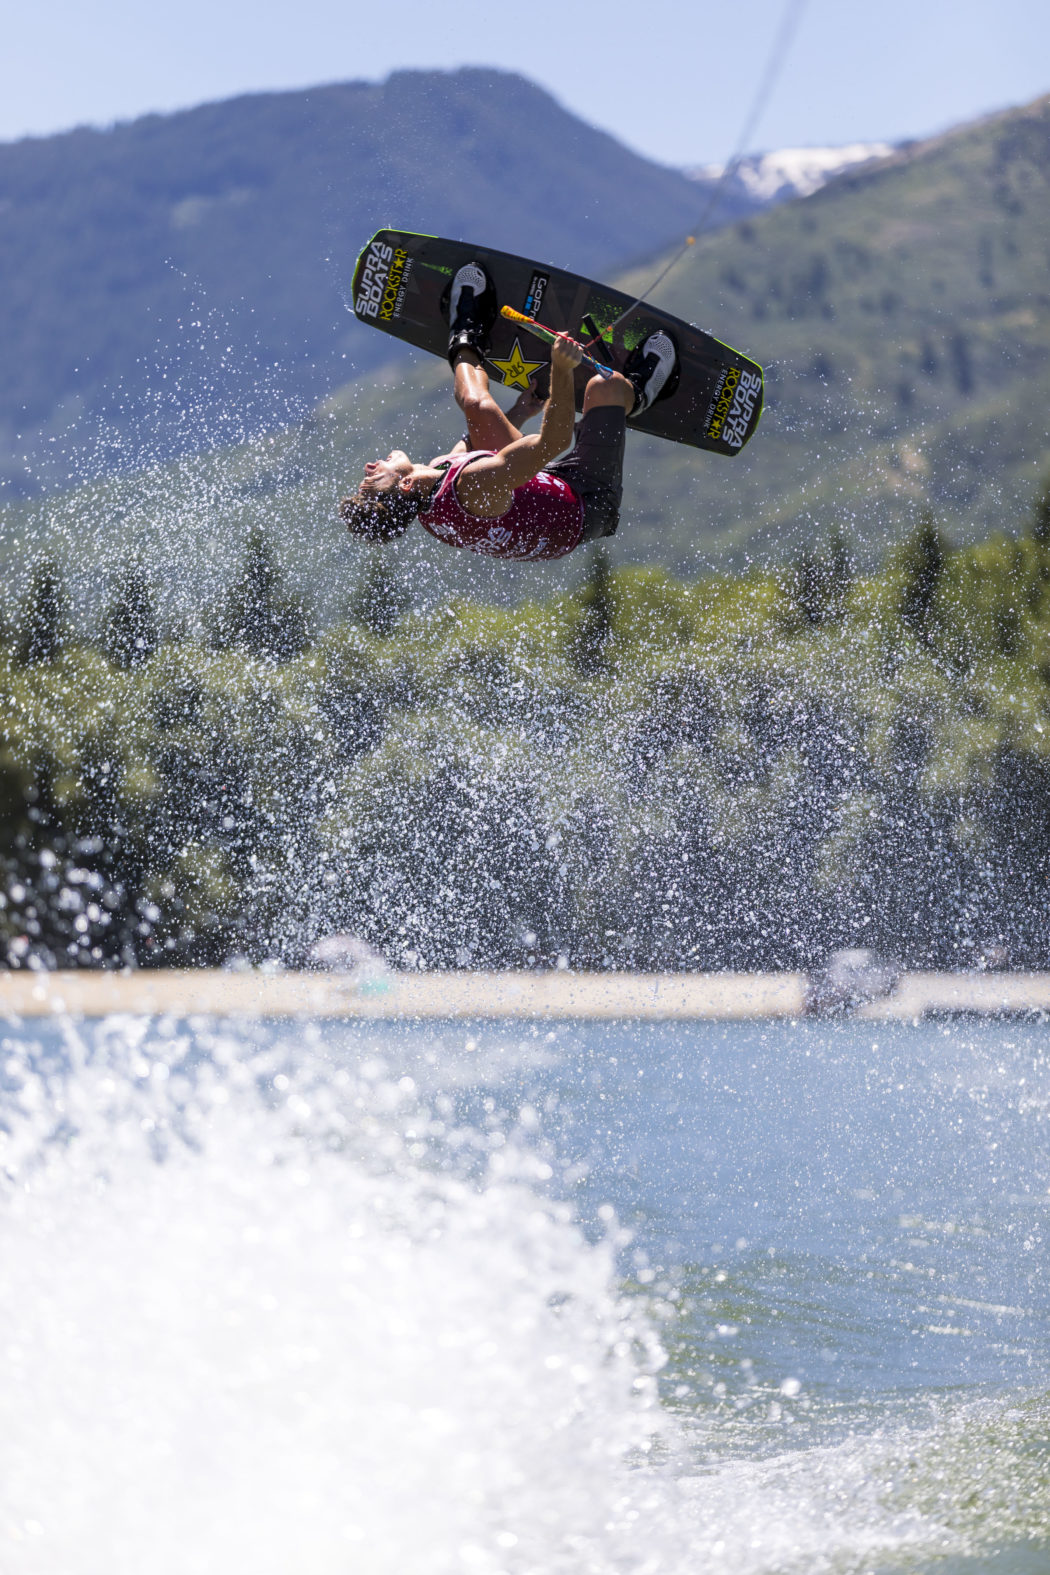 professional wakeboard tour